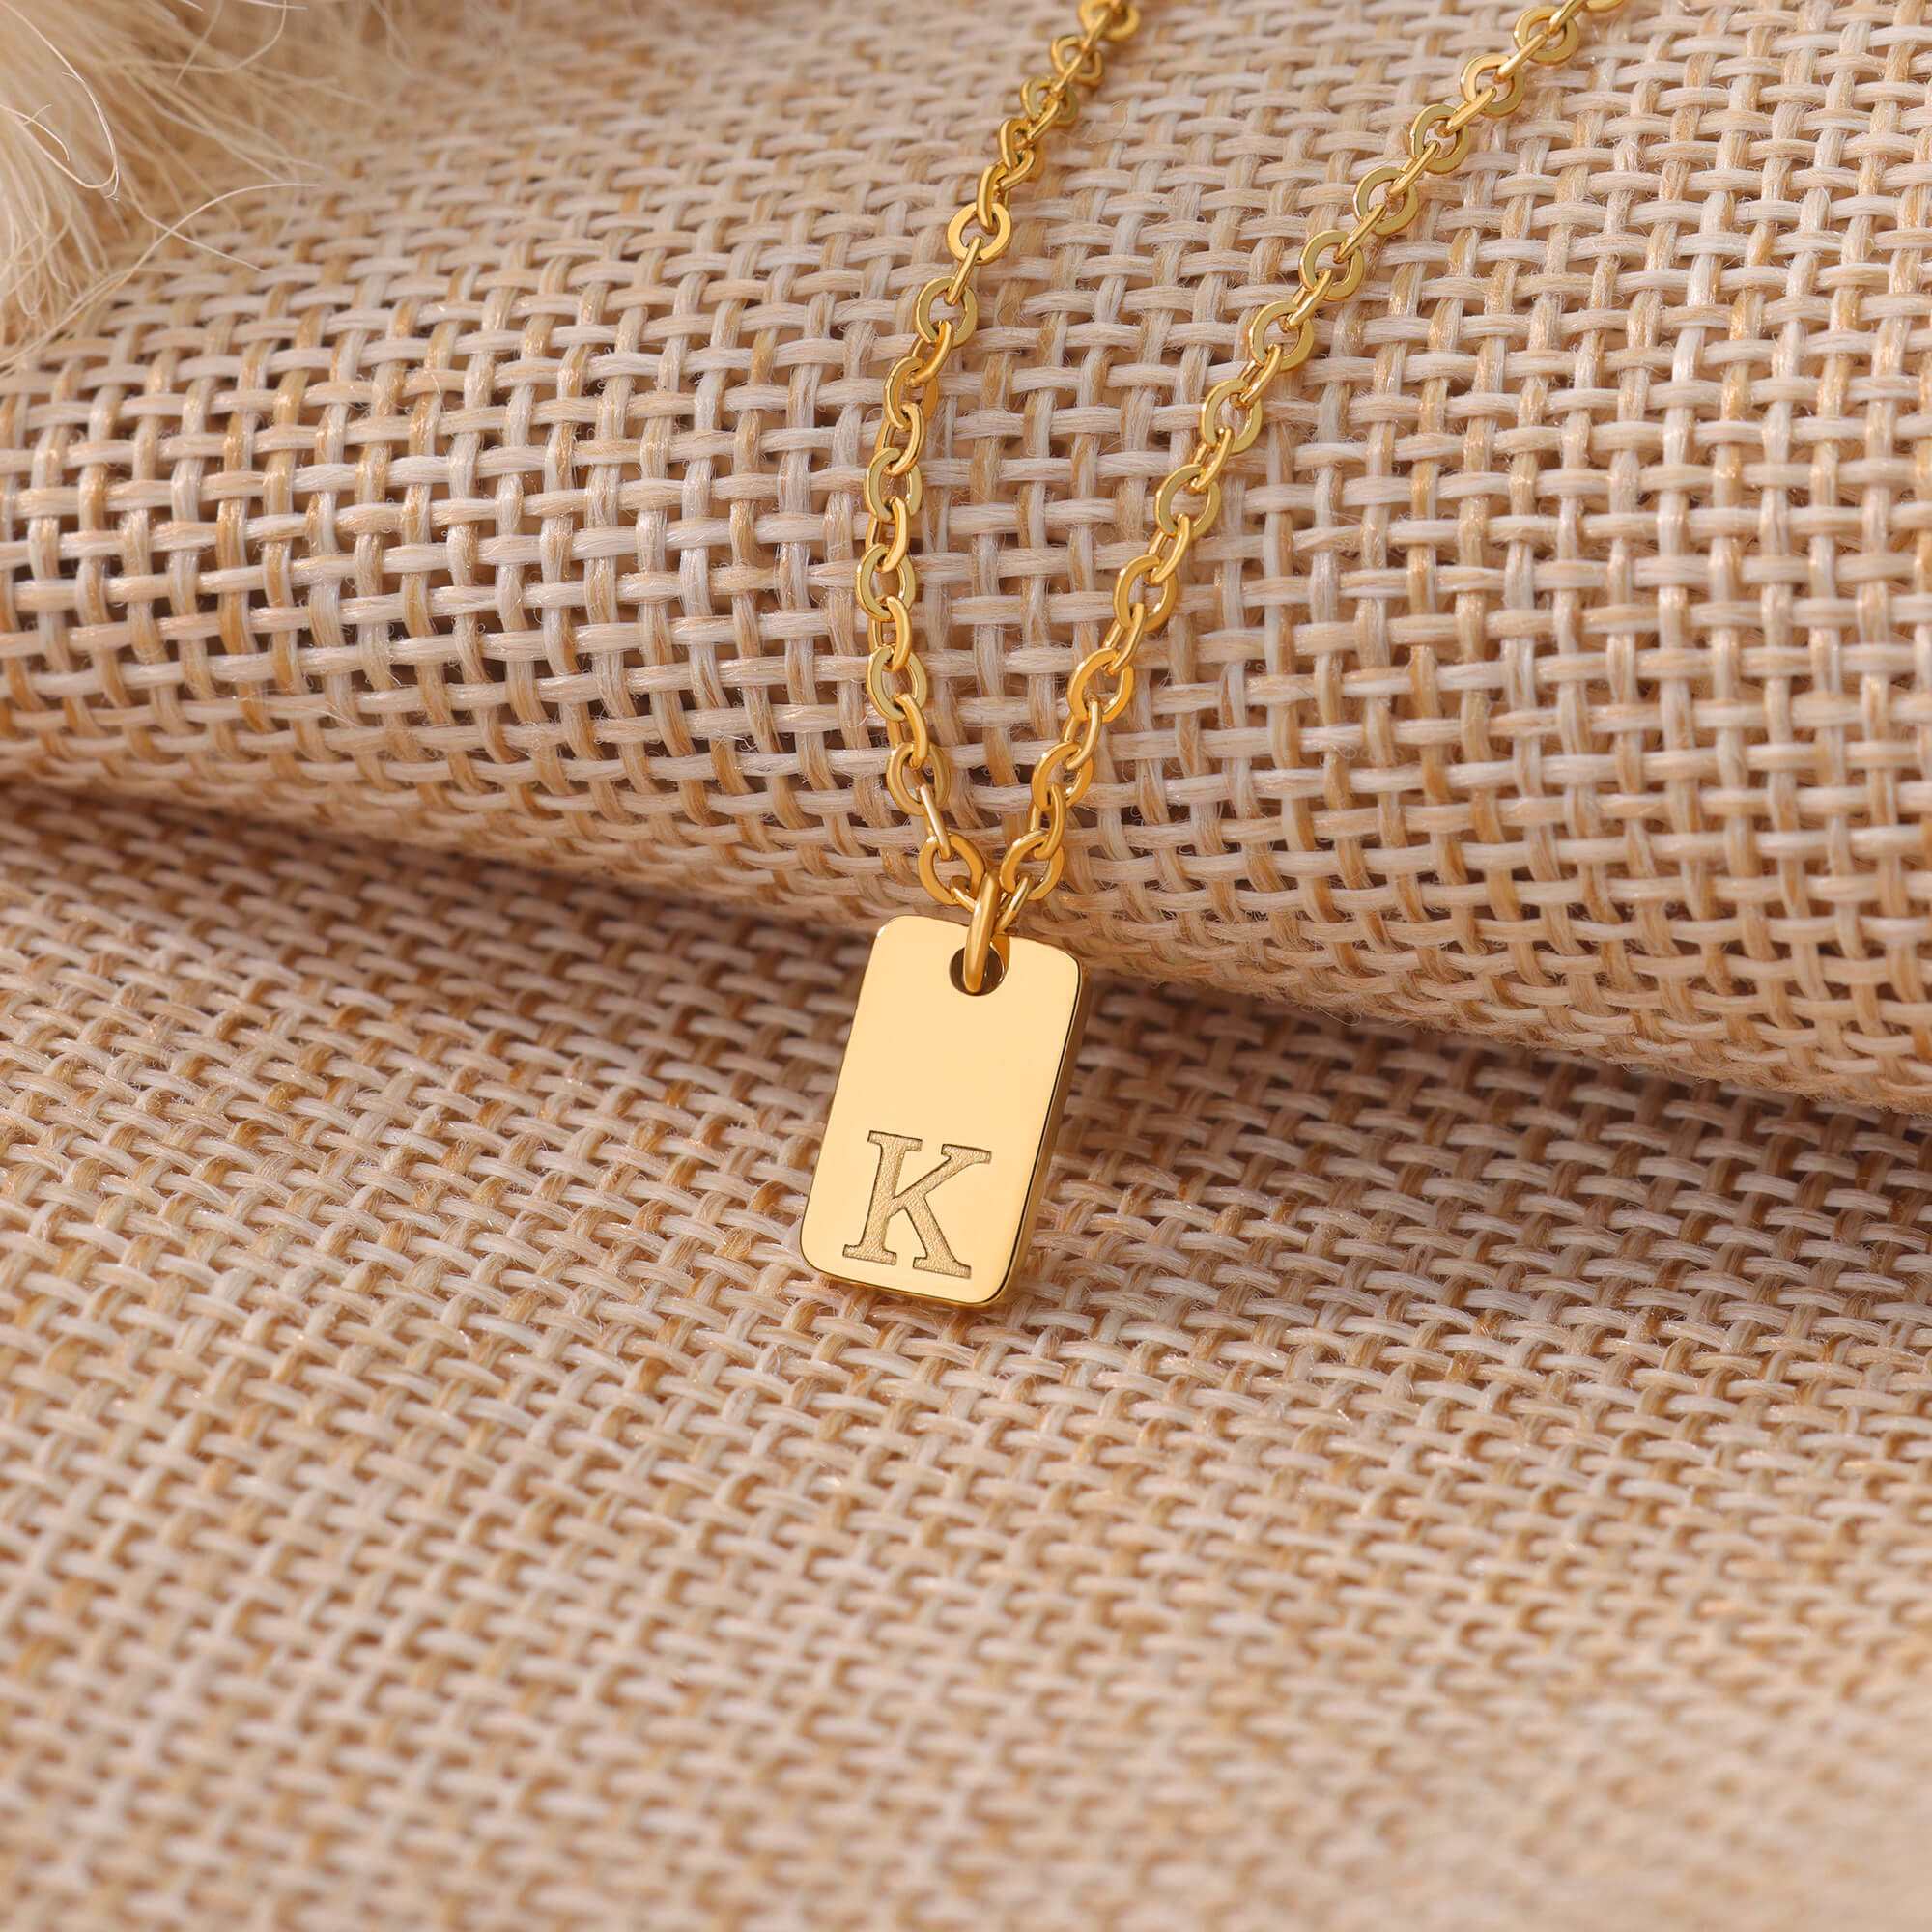 CShopping 20 inch Letter Initial Necklace, Square Pendant Necklace, Yellow  Gold Plated Choker Necklace, Charm Fashion Chain, Pendant Initial Capital  Letter Jewelry for Women Girls Men (Letter A/D/J) | Amazon.com